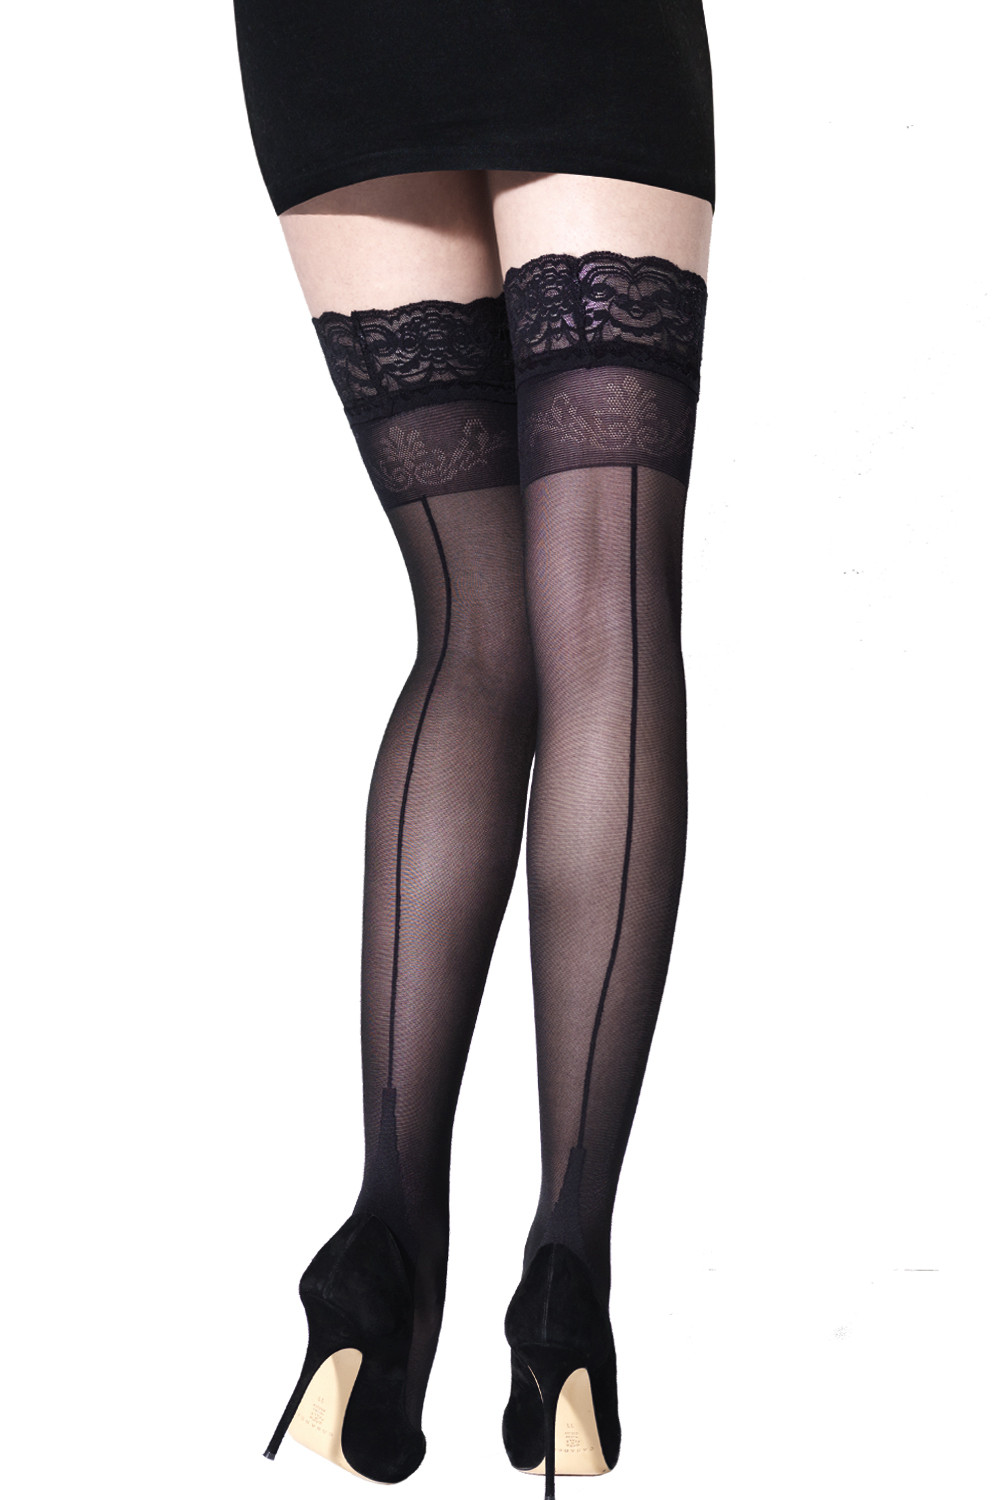 Women Sheer Sexy Stockings Lace Top T Stockings Over The Knee Long